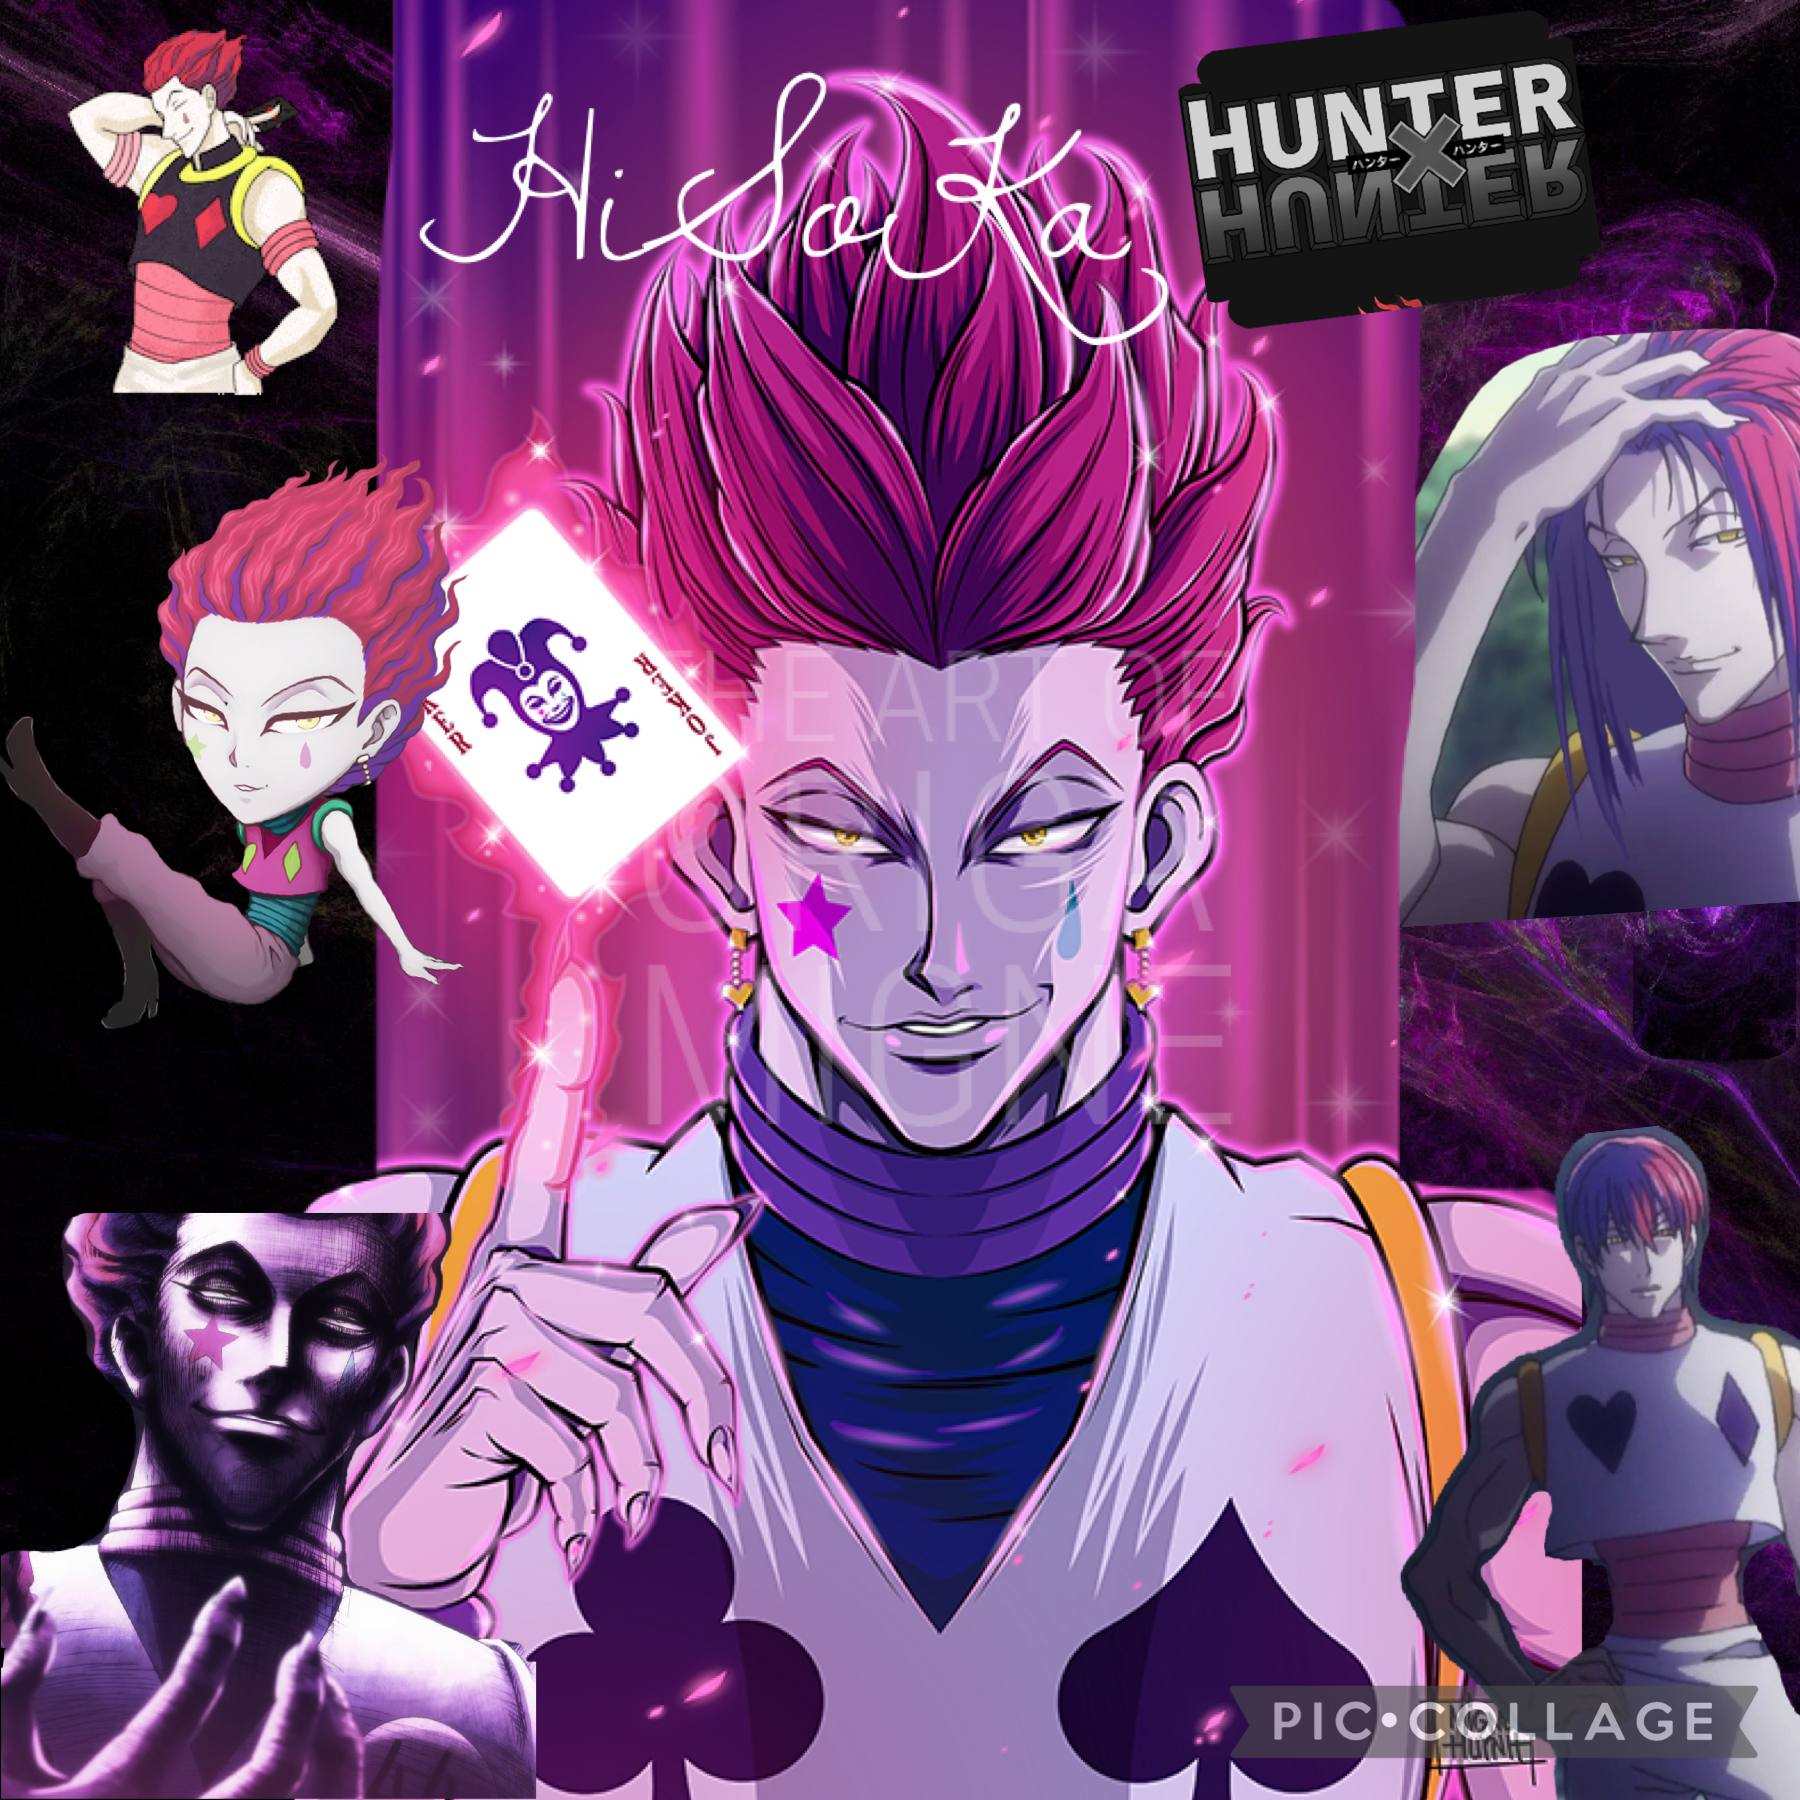 Hisoka from HxH he may be an animation but I’m a “big fan” 👀